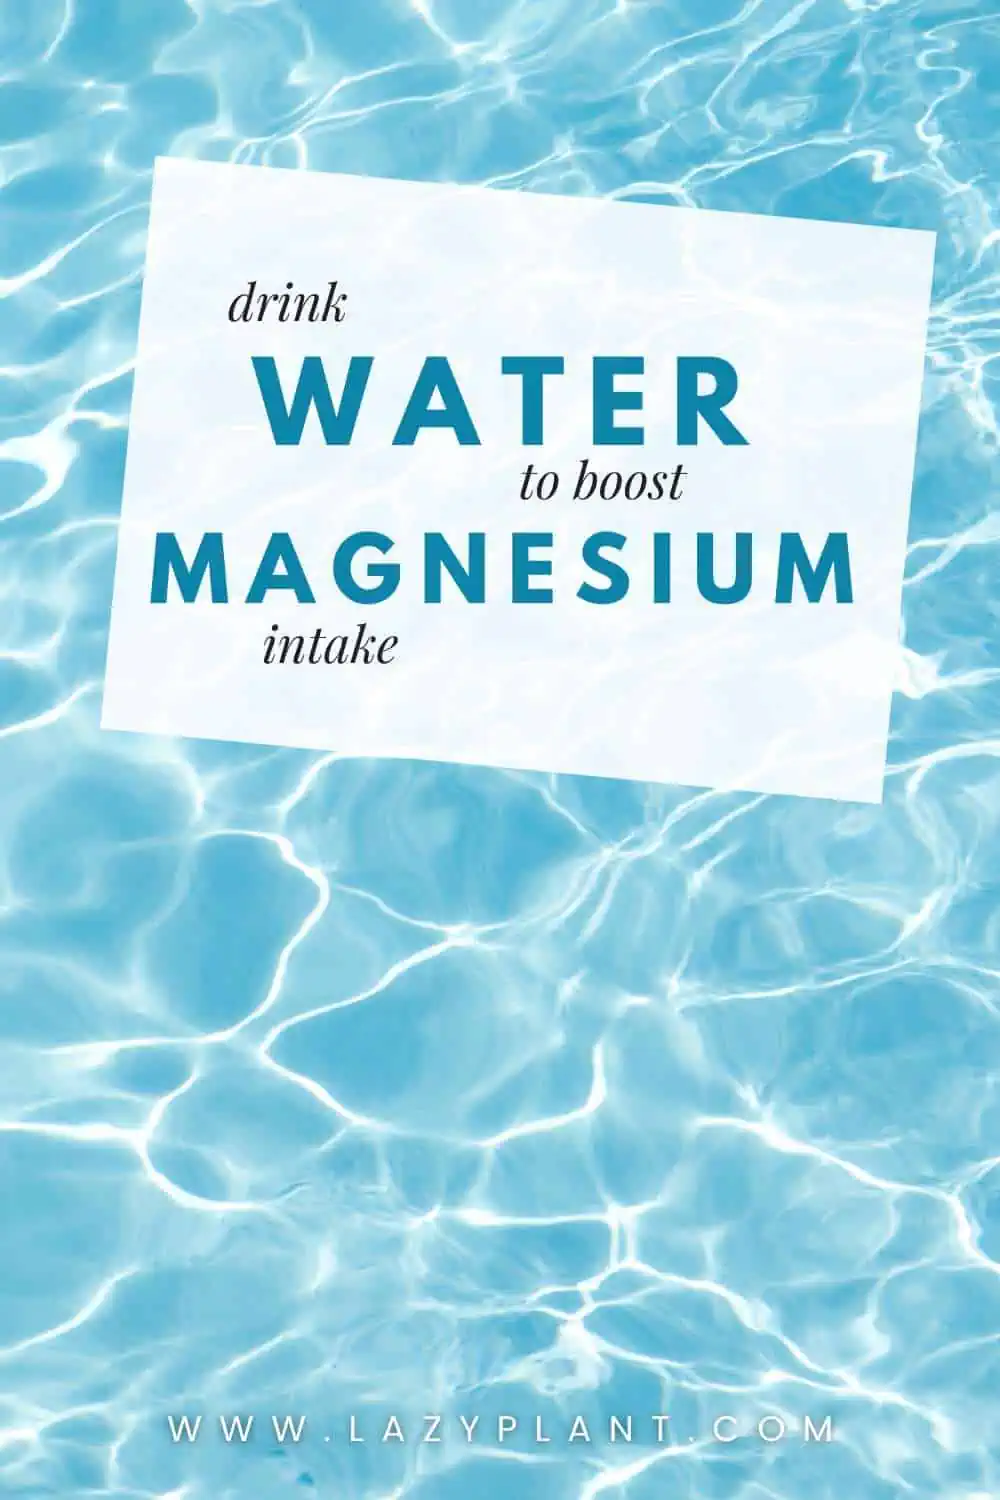 Health tips: Drinking Water to boost Magnesium intake.